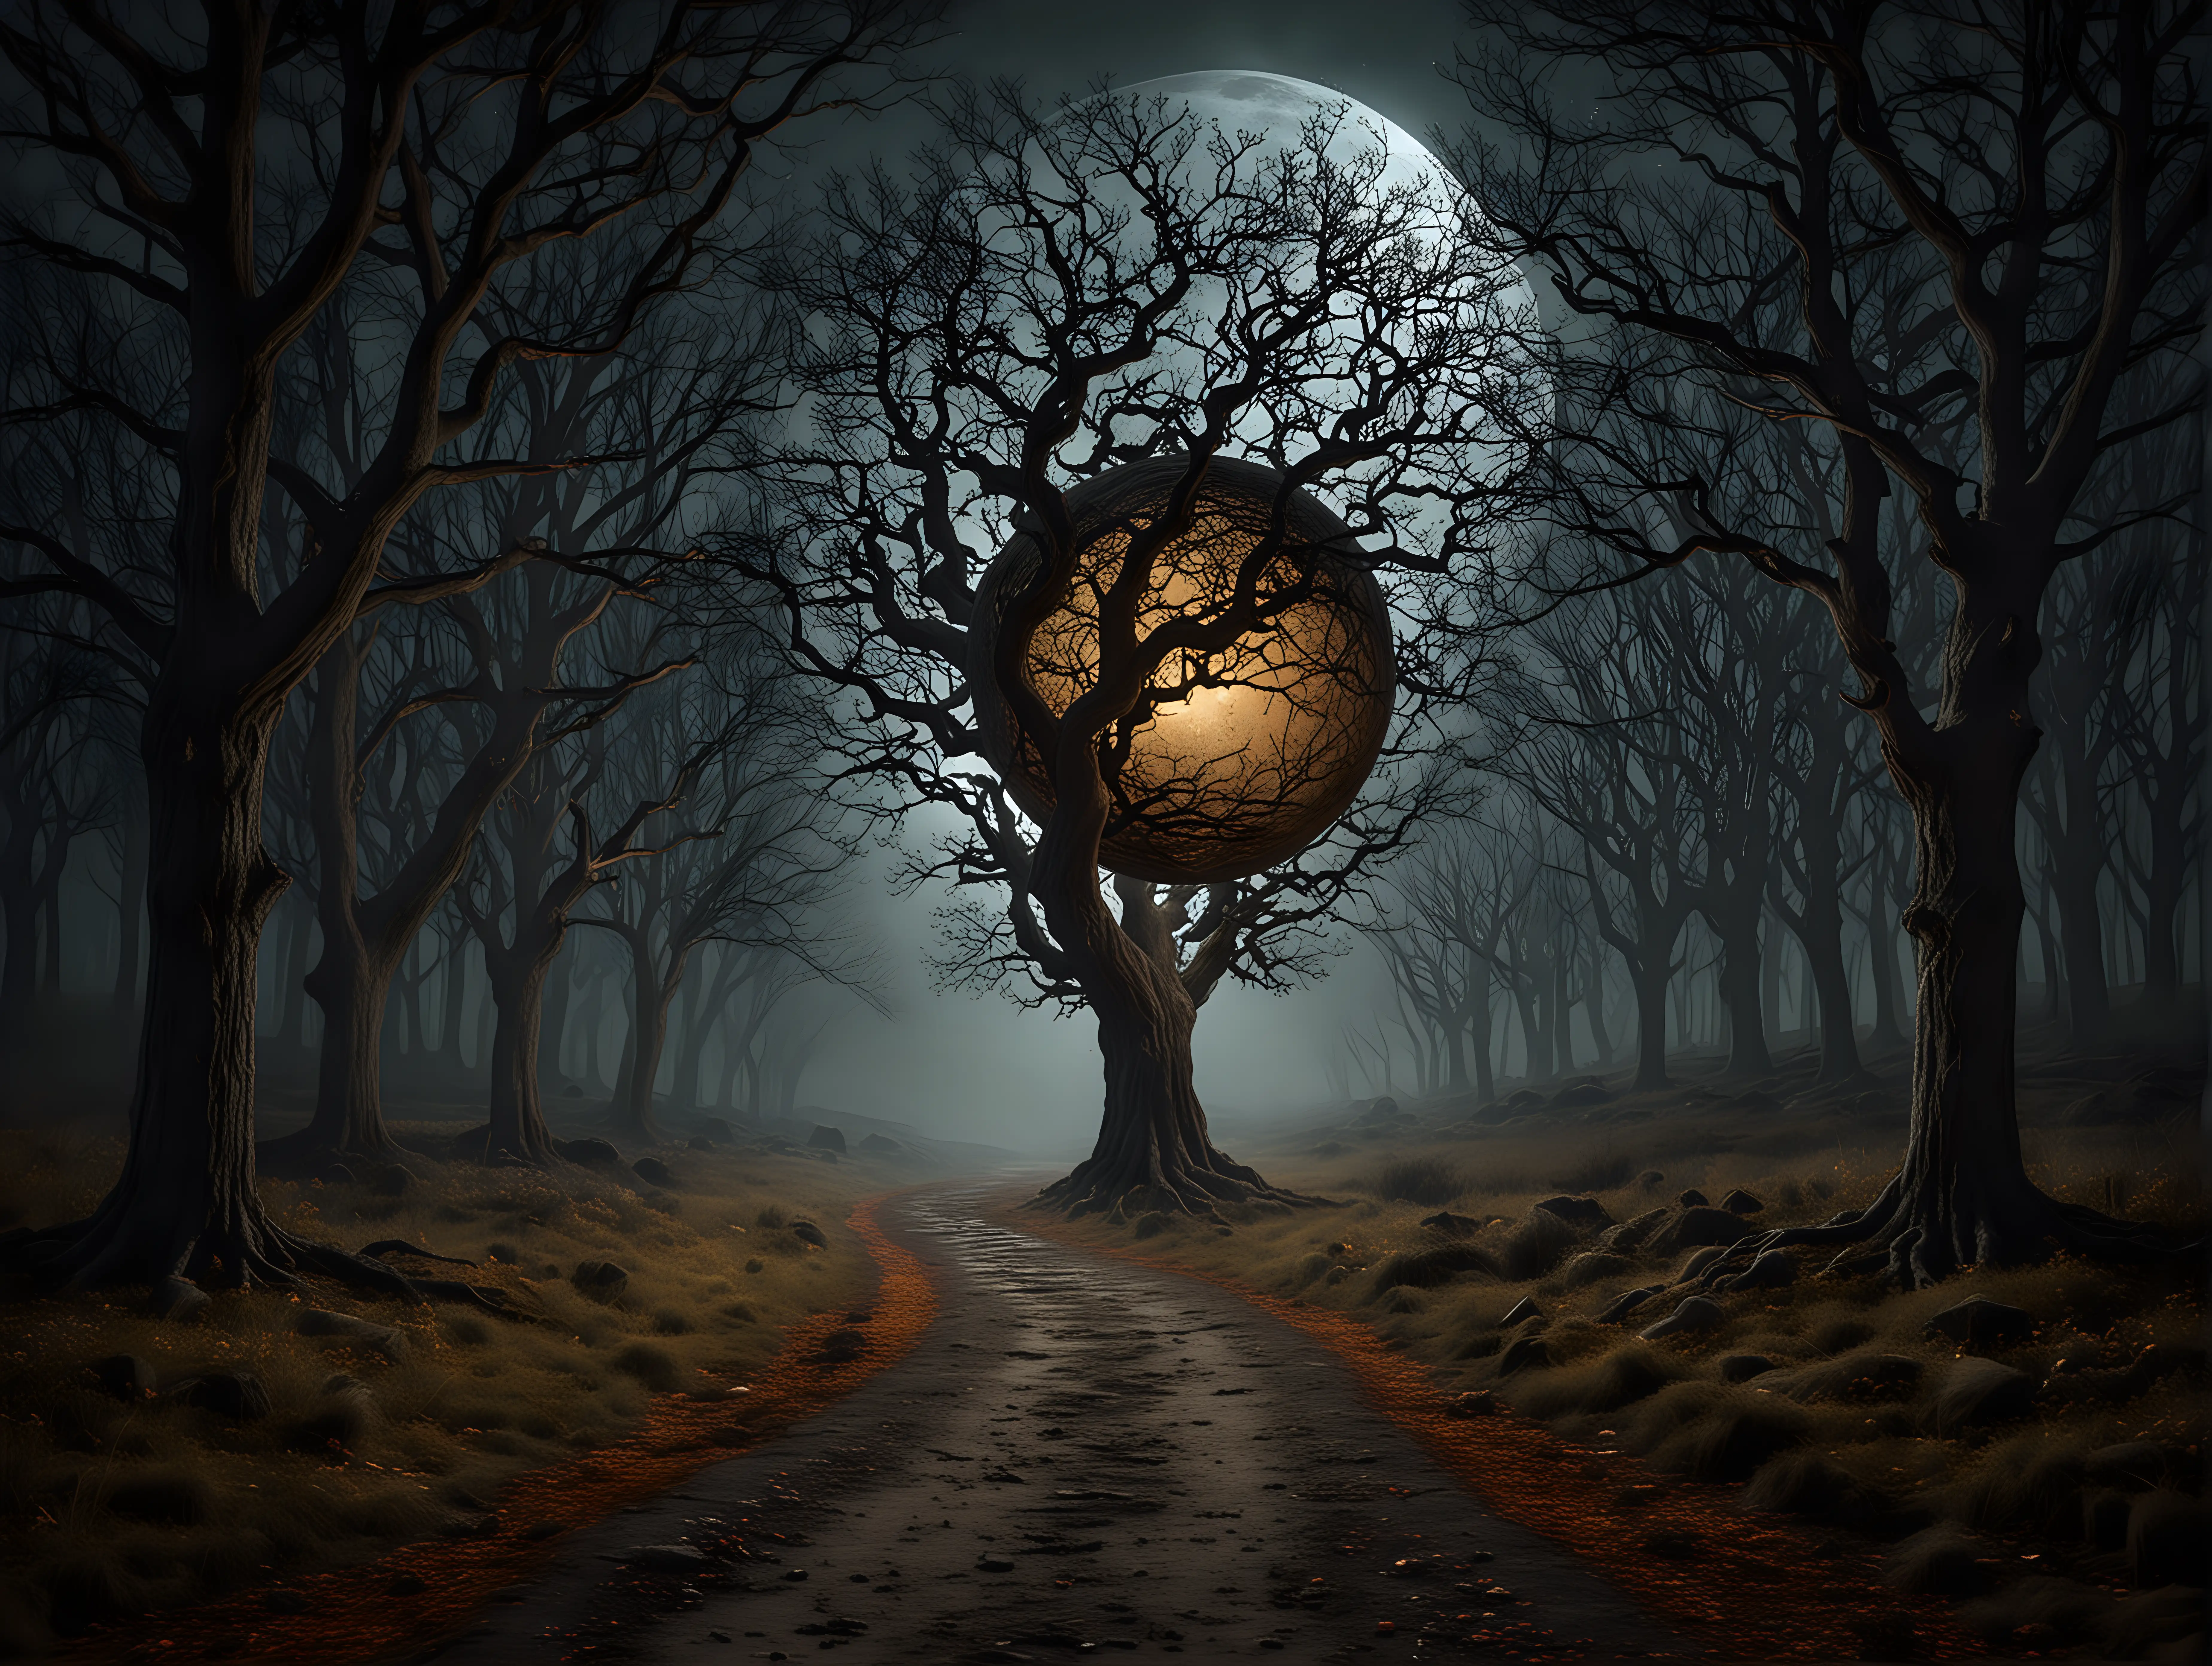 scarry forest dark large oak tree autumn moonlit night dirt path hill and valley floating sphere fantasy